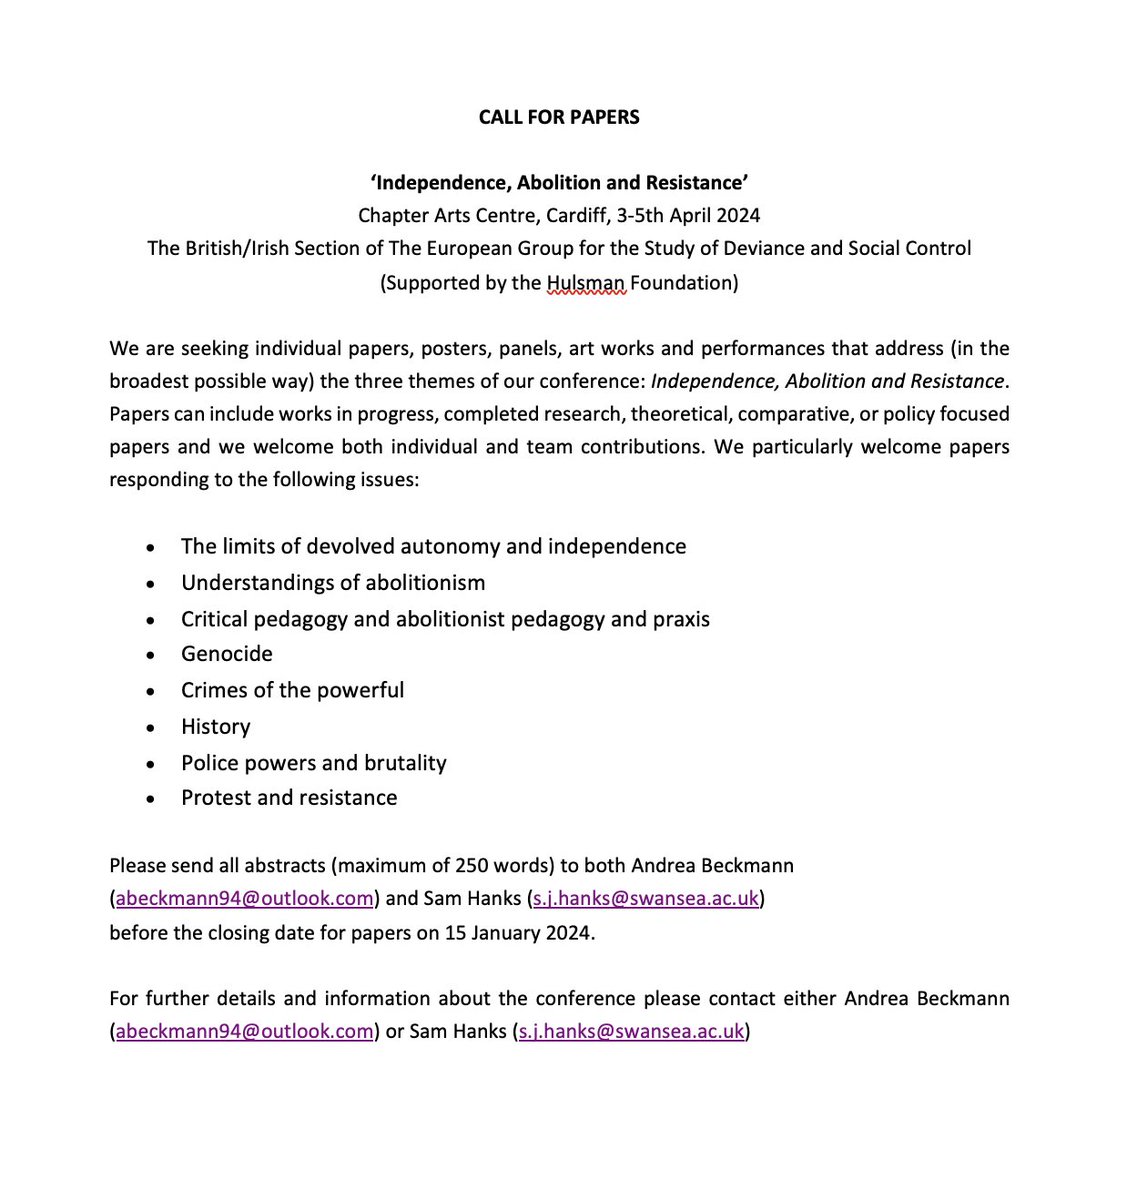 The British/Irish Section of @european_group will be holding a conference in Cardiff, Wales from 3-5th April 2024. (See next post for link to booking form) #Abolition #Wales #Resistance #Independence Please retweet Announcement👇 Call for papers 👇